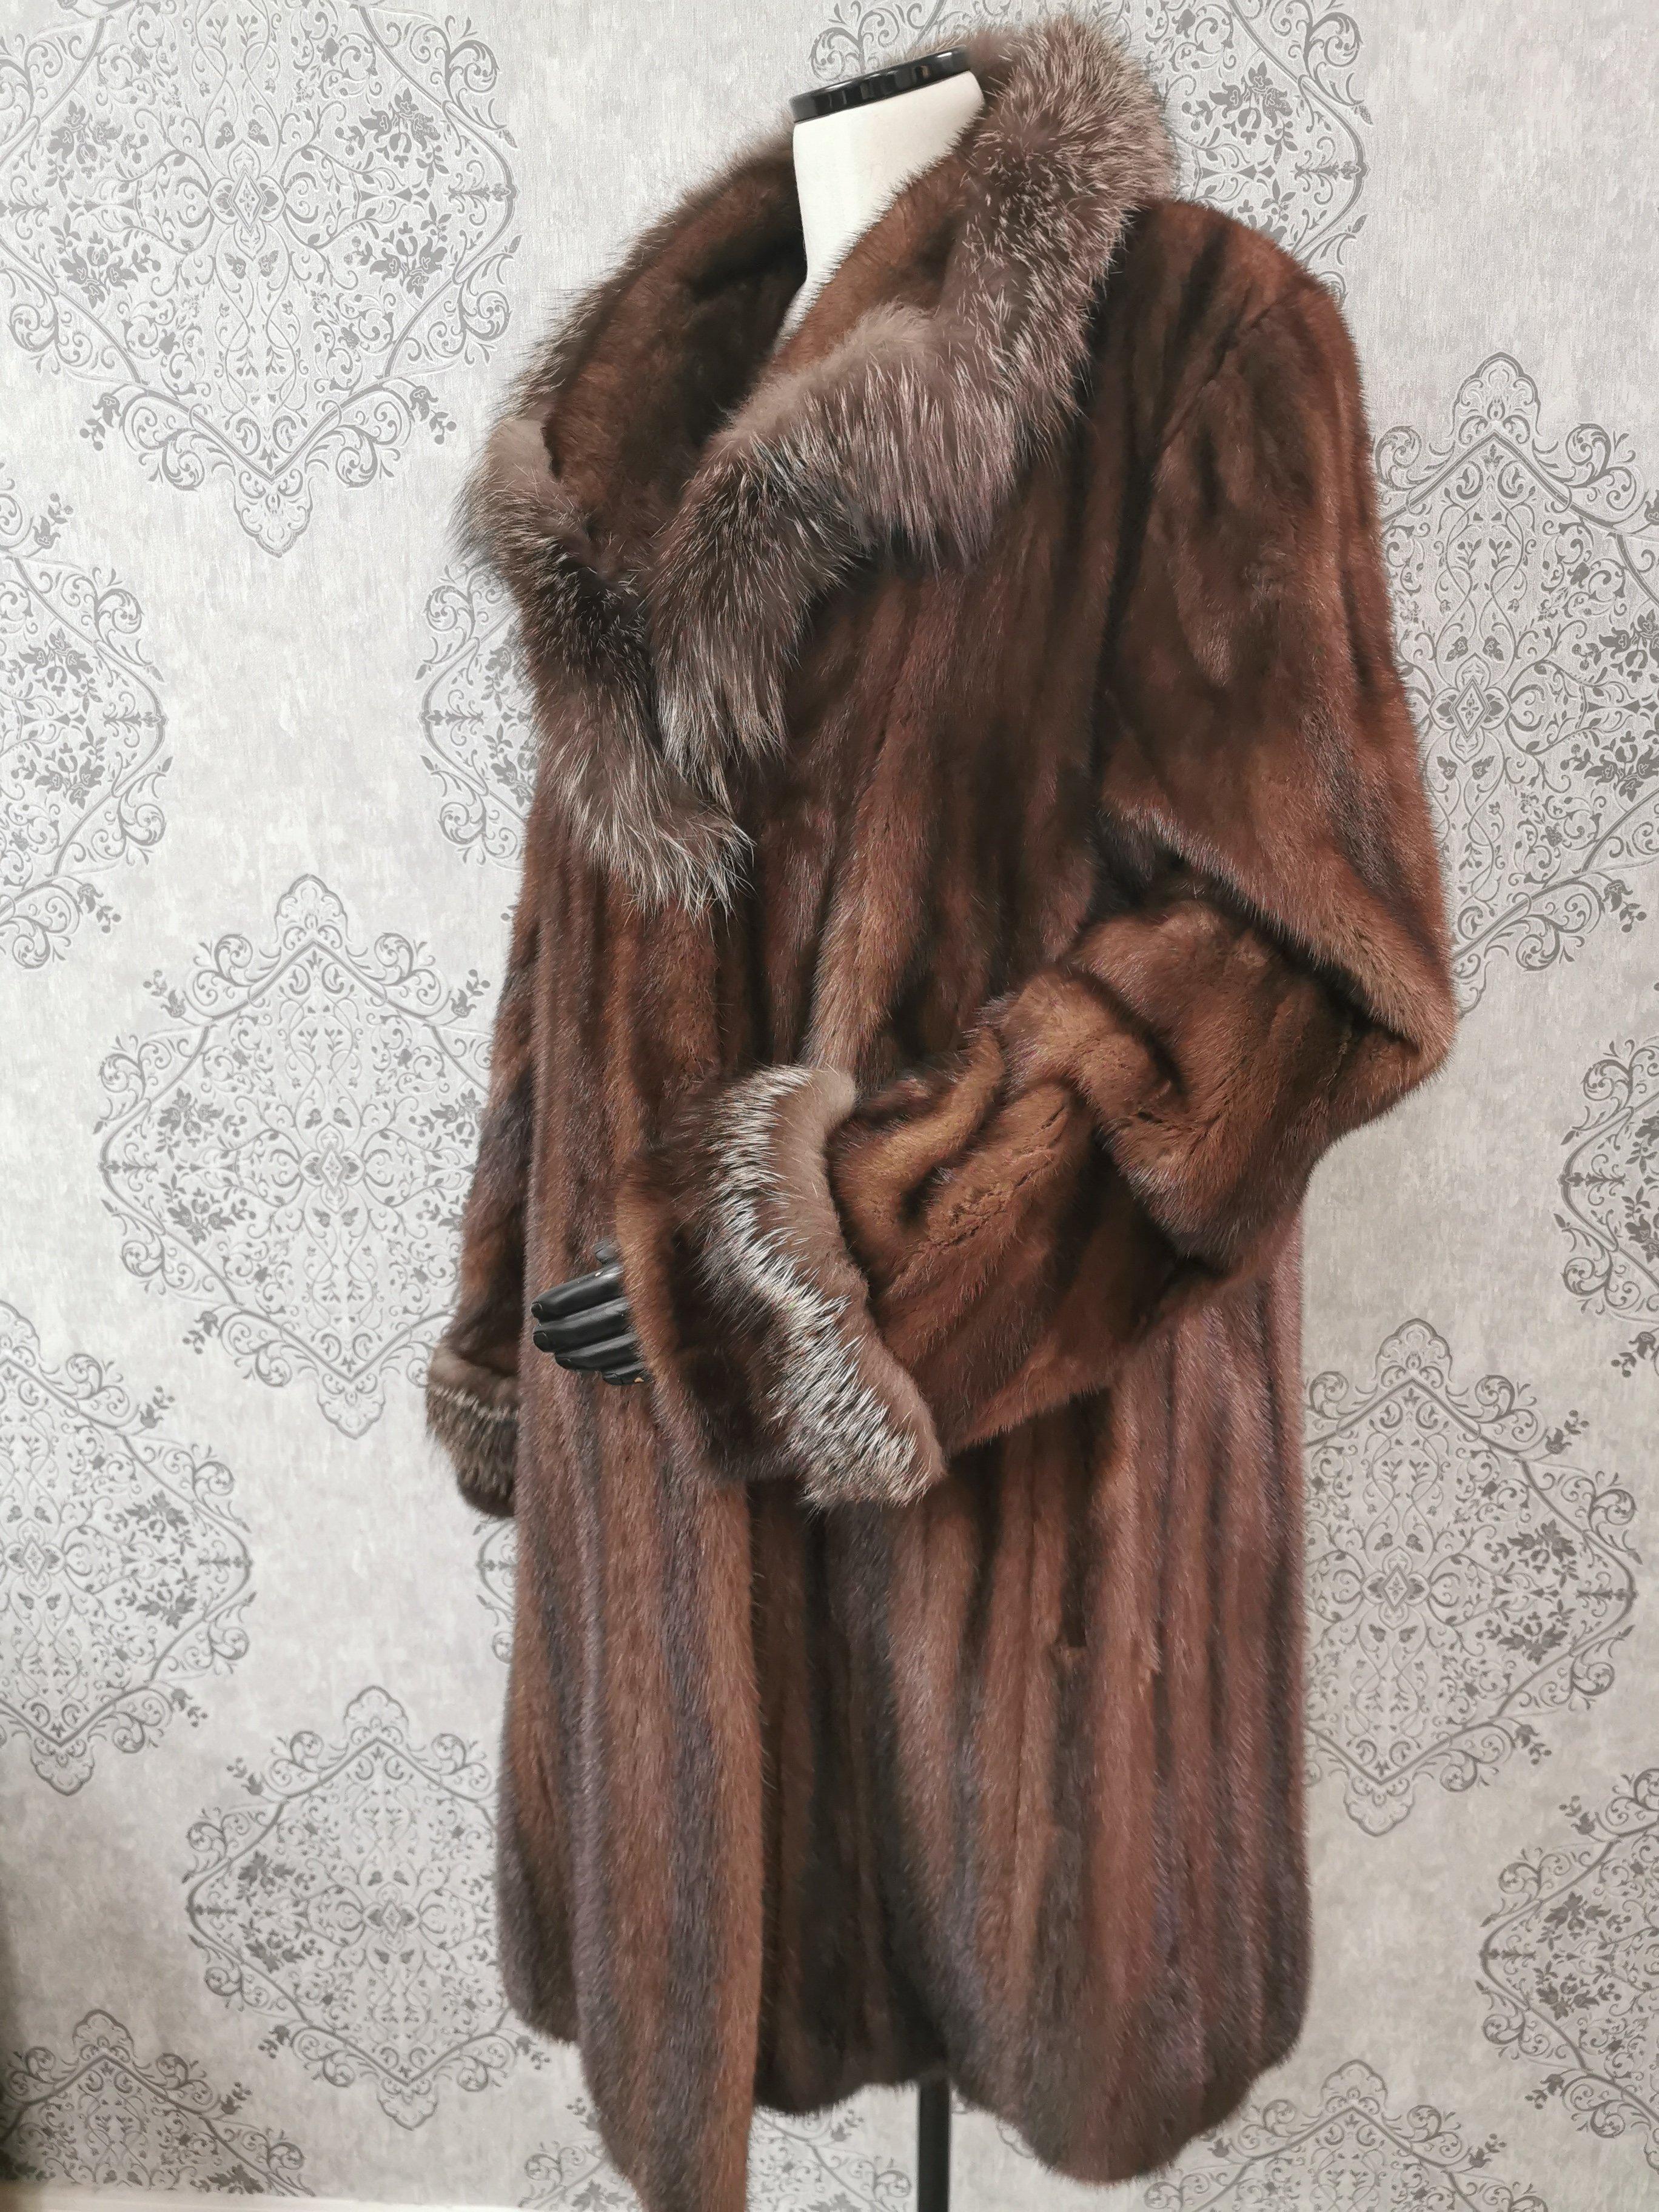 PRODUCT DESCRIPTION:

Brand New fashionable demi buff mink fur with fox fur trim in the collar and sleeves and a large sweep.

Condition: New 

Closure: Hooks & Eyes

Colour: Demi Buff

Material: Demi Buff Mink

Garment type: Swing Coat

Sleeves: